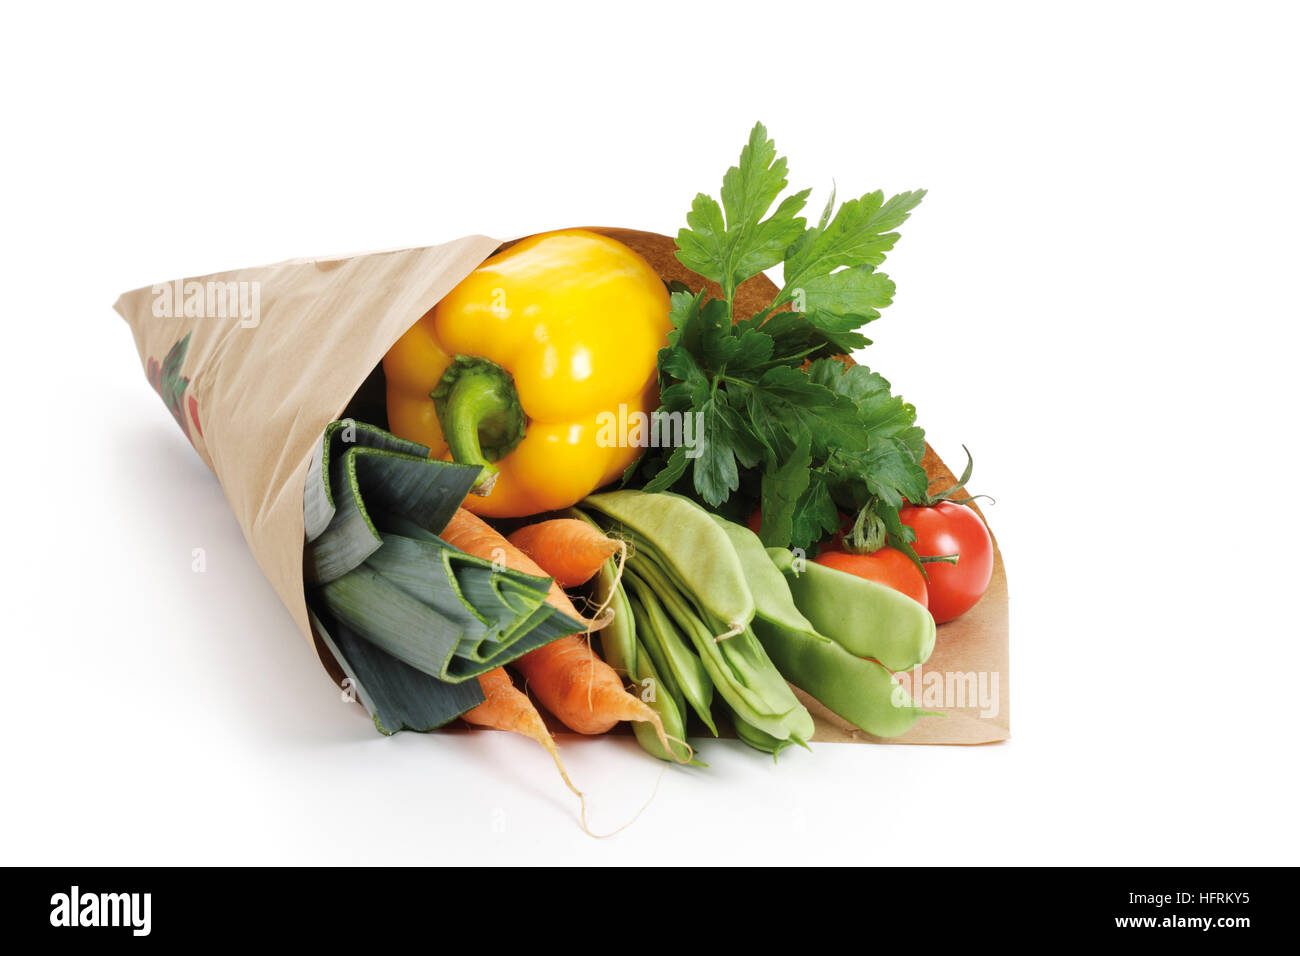 Paper bag filled with vegetables Stock Photo